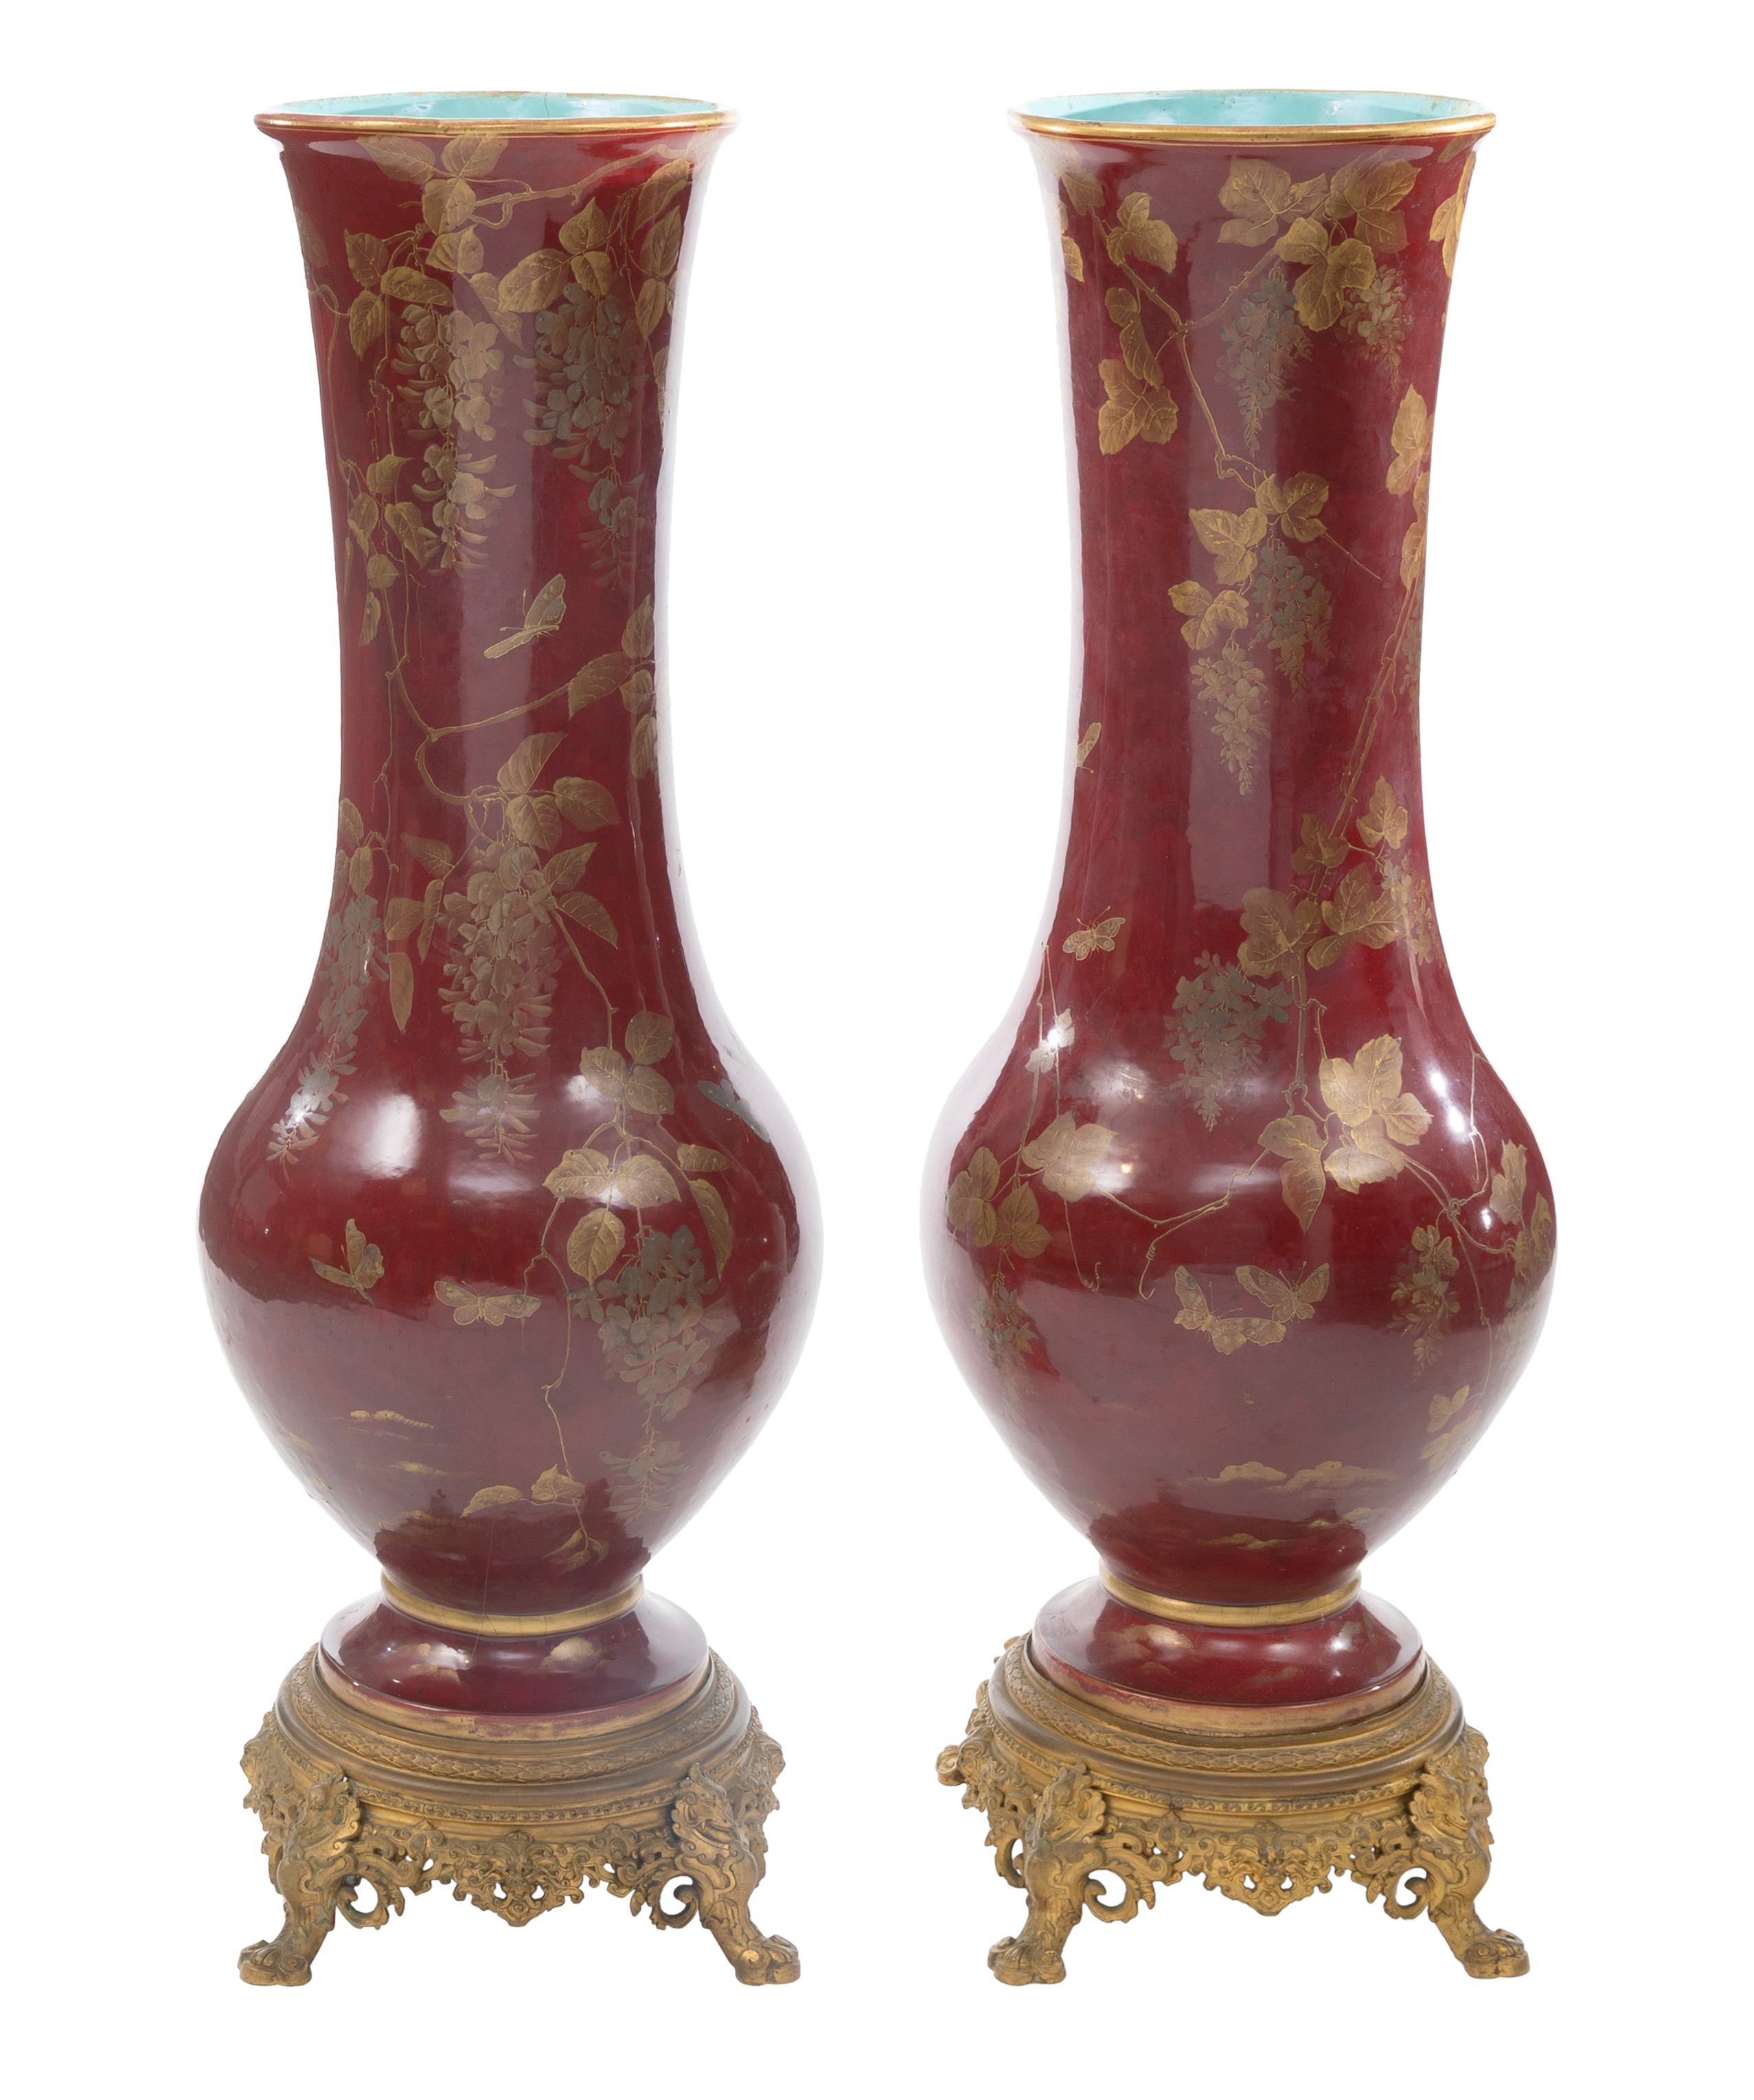 A PAIR OF EUROPEAN MONUMENTAL CHINOISERIE STYLE VASES ON ORMOLU BASES, LATE 19TH-EARLY 20TH CENTURY